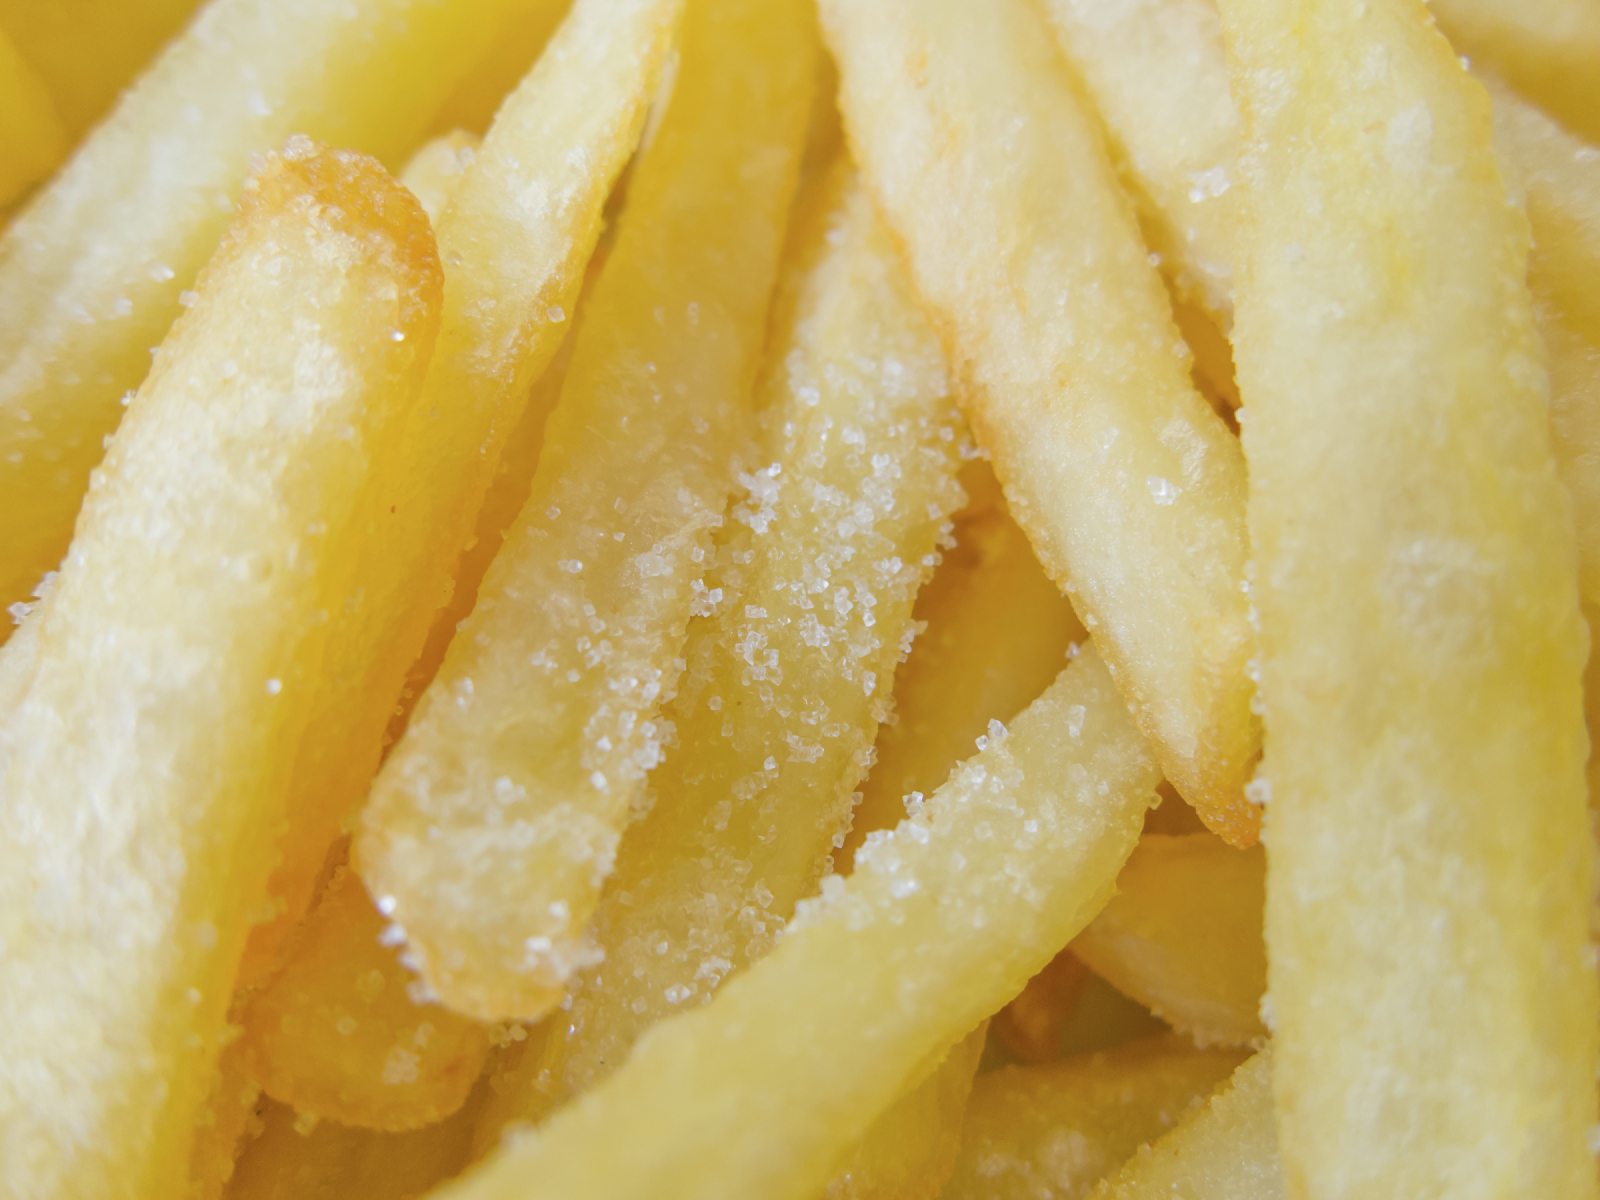 Eating chips may double risk of death